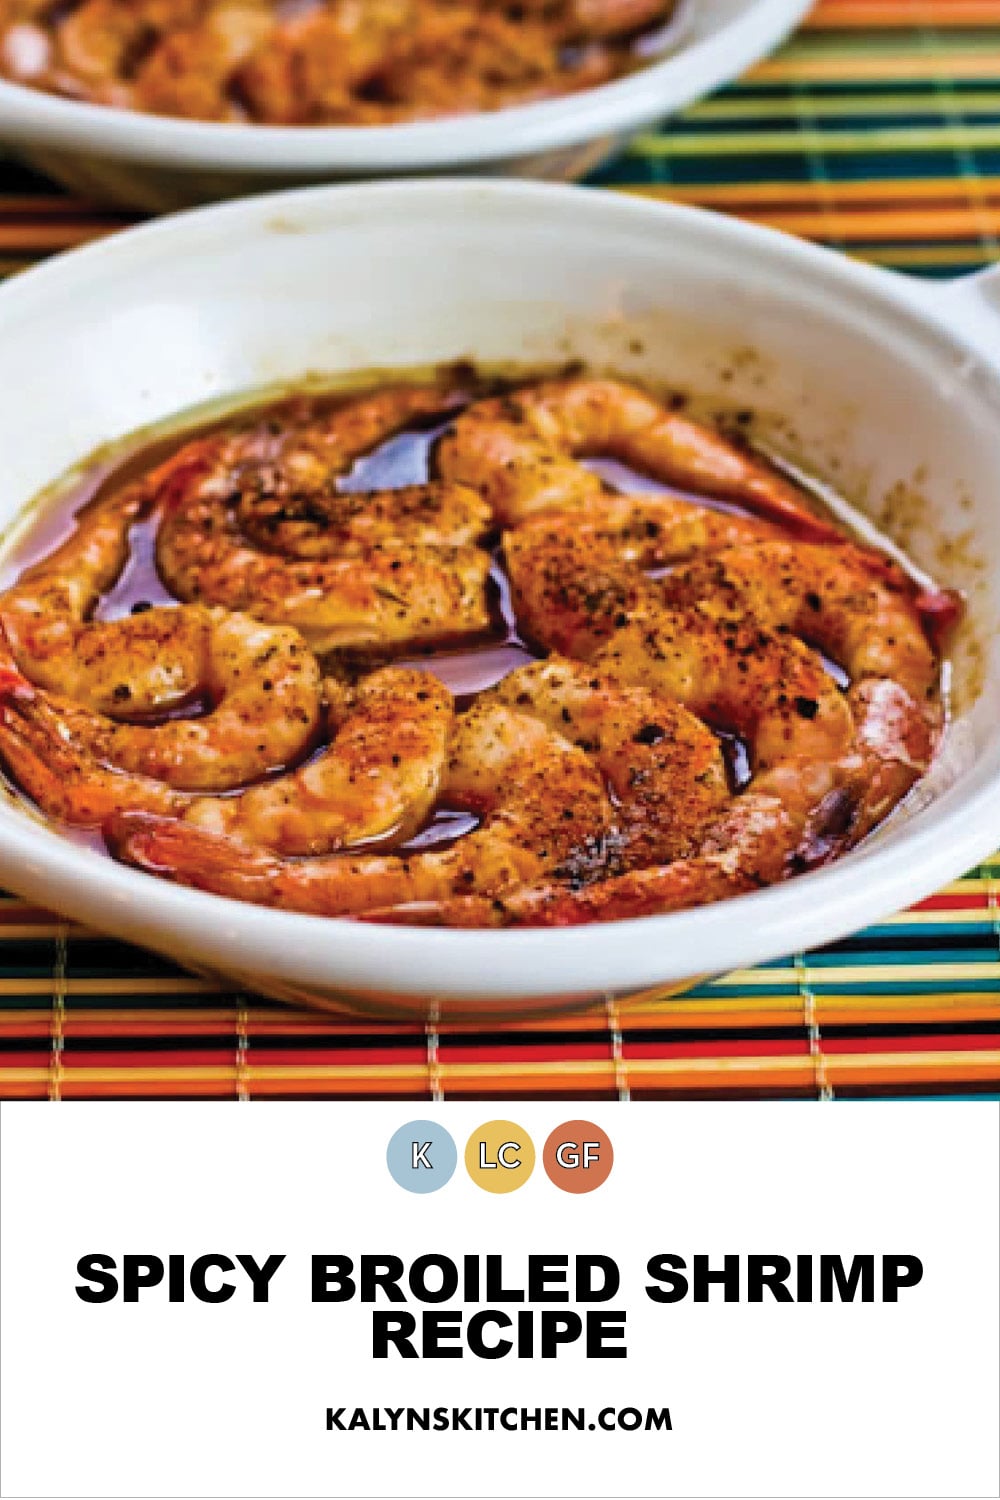 Pinterest image of Spicy Broiled Shrimp Recipe